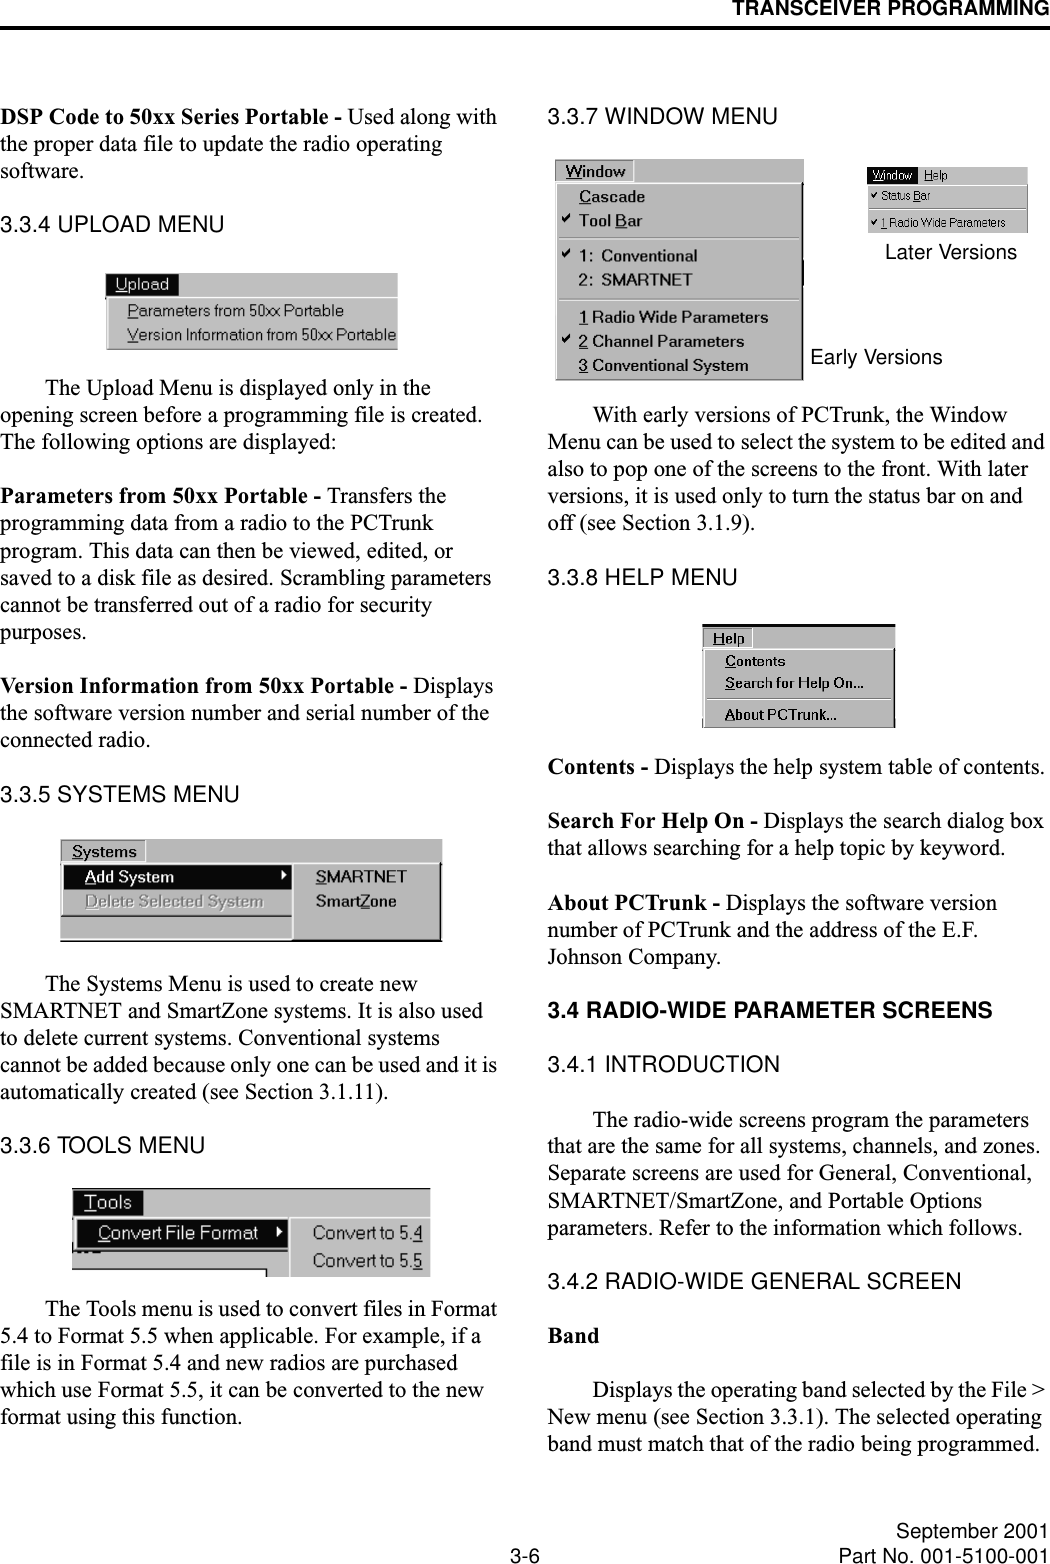 TRANSCEIVER PROGRAMMING3-6 September 2001Part No. 001-5100-001DSP Code to 50xx Series Portable - Used along with the proper data file to update the radio operating software.3.3.4 UPLOAD MENUThe Upload Menu is displayed only in the opening screen before a programming file is created. The following options are displayed:Parameters from 50xx Portable - Transfers the programming data from a radio to the PCTrunk program. This data can then be viewed, edited, or saved to a disk file as desired. Scrambling parameters cannot be transferred out of a radio for security purposes.Version Information from 50xx Portable - Displays the software version number and serial number of the connected radio.3.3.5 SYSTEMS MENUThe Systems Menu is used to create new SMARTNET and SmartZone systems. It is also used to delete current systems. Conventional systems cannot be added because only one can be used and it is automatically created (see Section 3.1.11).3.3.6 TOOLS MENUThe Tools menu is used to convert files in Format 5.4 to Format 5.5 when applicable. For example, if a file is in Format 5.4 and new radios are purchased which use Format 5.5, it can be converted to the new format using this function.3.3.7 WINDOW MENUWith early versions of PCTrunk, the Window Menu can be used to select the system to be edited and also to pop one of the screens to the front. With later versions, it is used only to turn the status bar on and off (see Section 3.1.9).3.3.8 HELP MENUContents - Displays the help system table of contents.Search For Help On - Displays the search dialog box that allows searching for a help topic by keyword.About PCTrunk - Displays the software version number of PCTrunk and the address of the E.F. Johnson Company.3.4 RADIO-WIDE PARAMETER SCREENS3.4.1 INTRODUCTIONThe radio-wide screens program the parameters that are the same for all systems, channels, and zones. Separate screens are used for General, Conventional, SMARTNET/SmartZone, and Portable Options parameters. Refer to the information which follows.3.4.2 RADIO-WIDE GENERAL SCREENBandDisplays the operating band selected by the File &gt; New menu (see Section 3.3.1). The selected operating band must match that of the radio being programmed. Early VersionsLater Versions